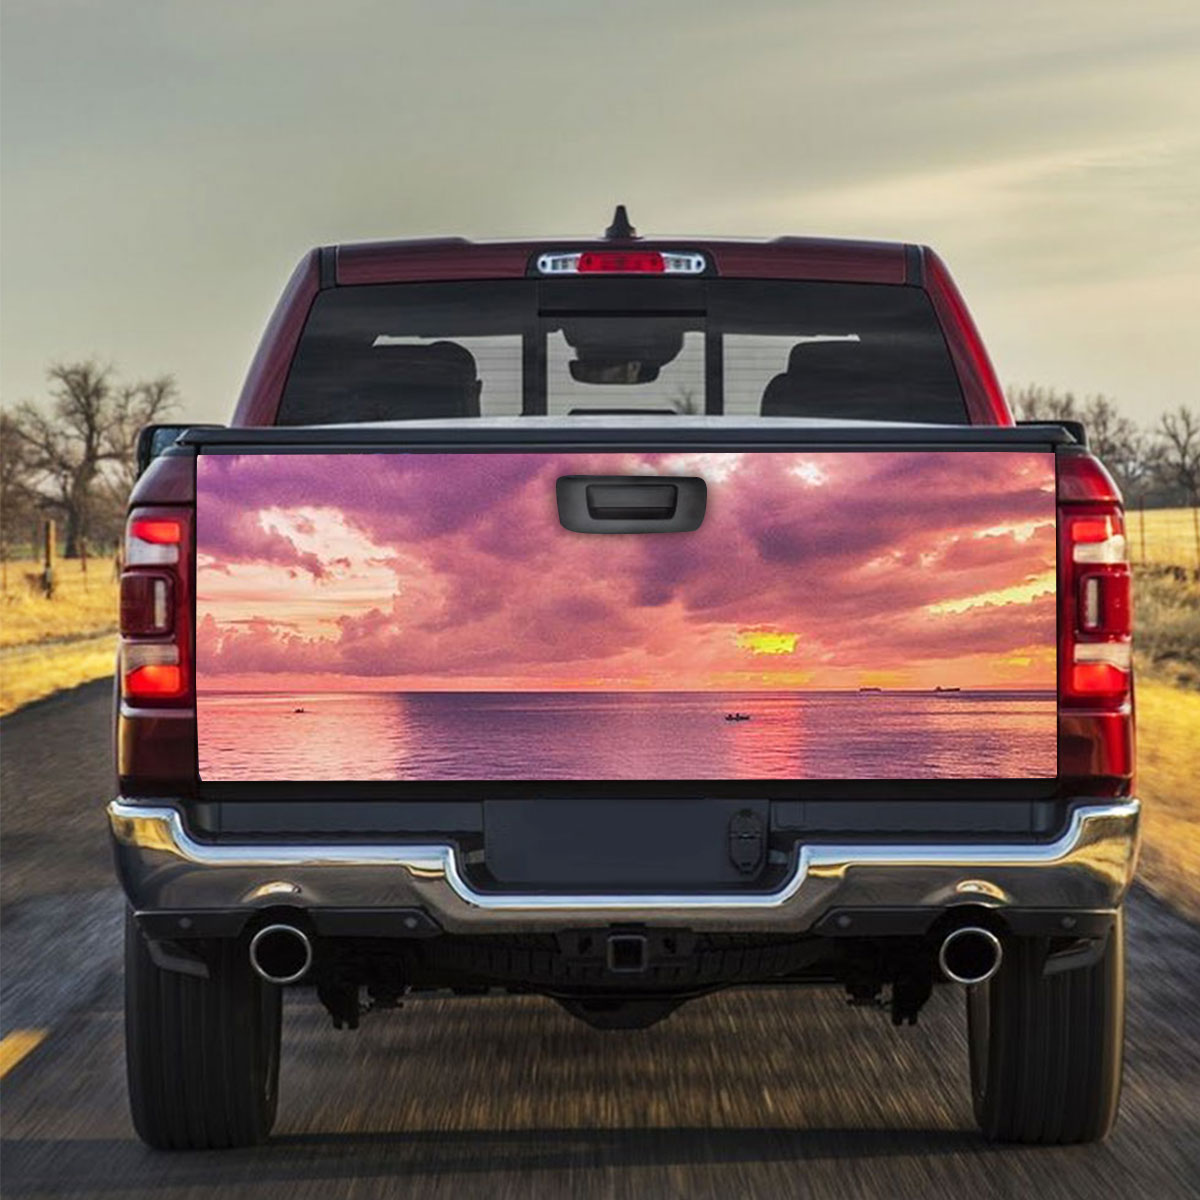 Sunset Sky Truck Bed Decal_2_1